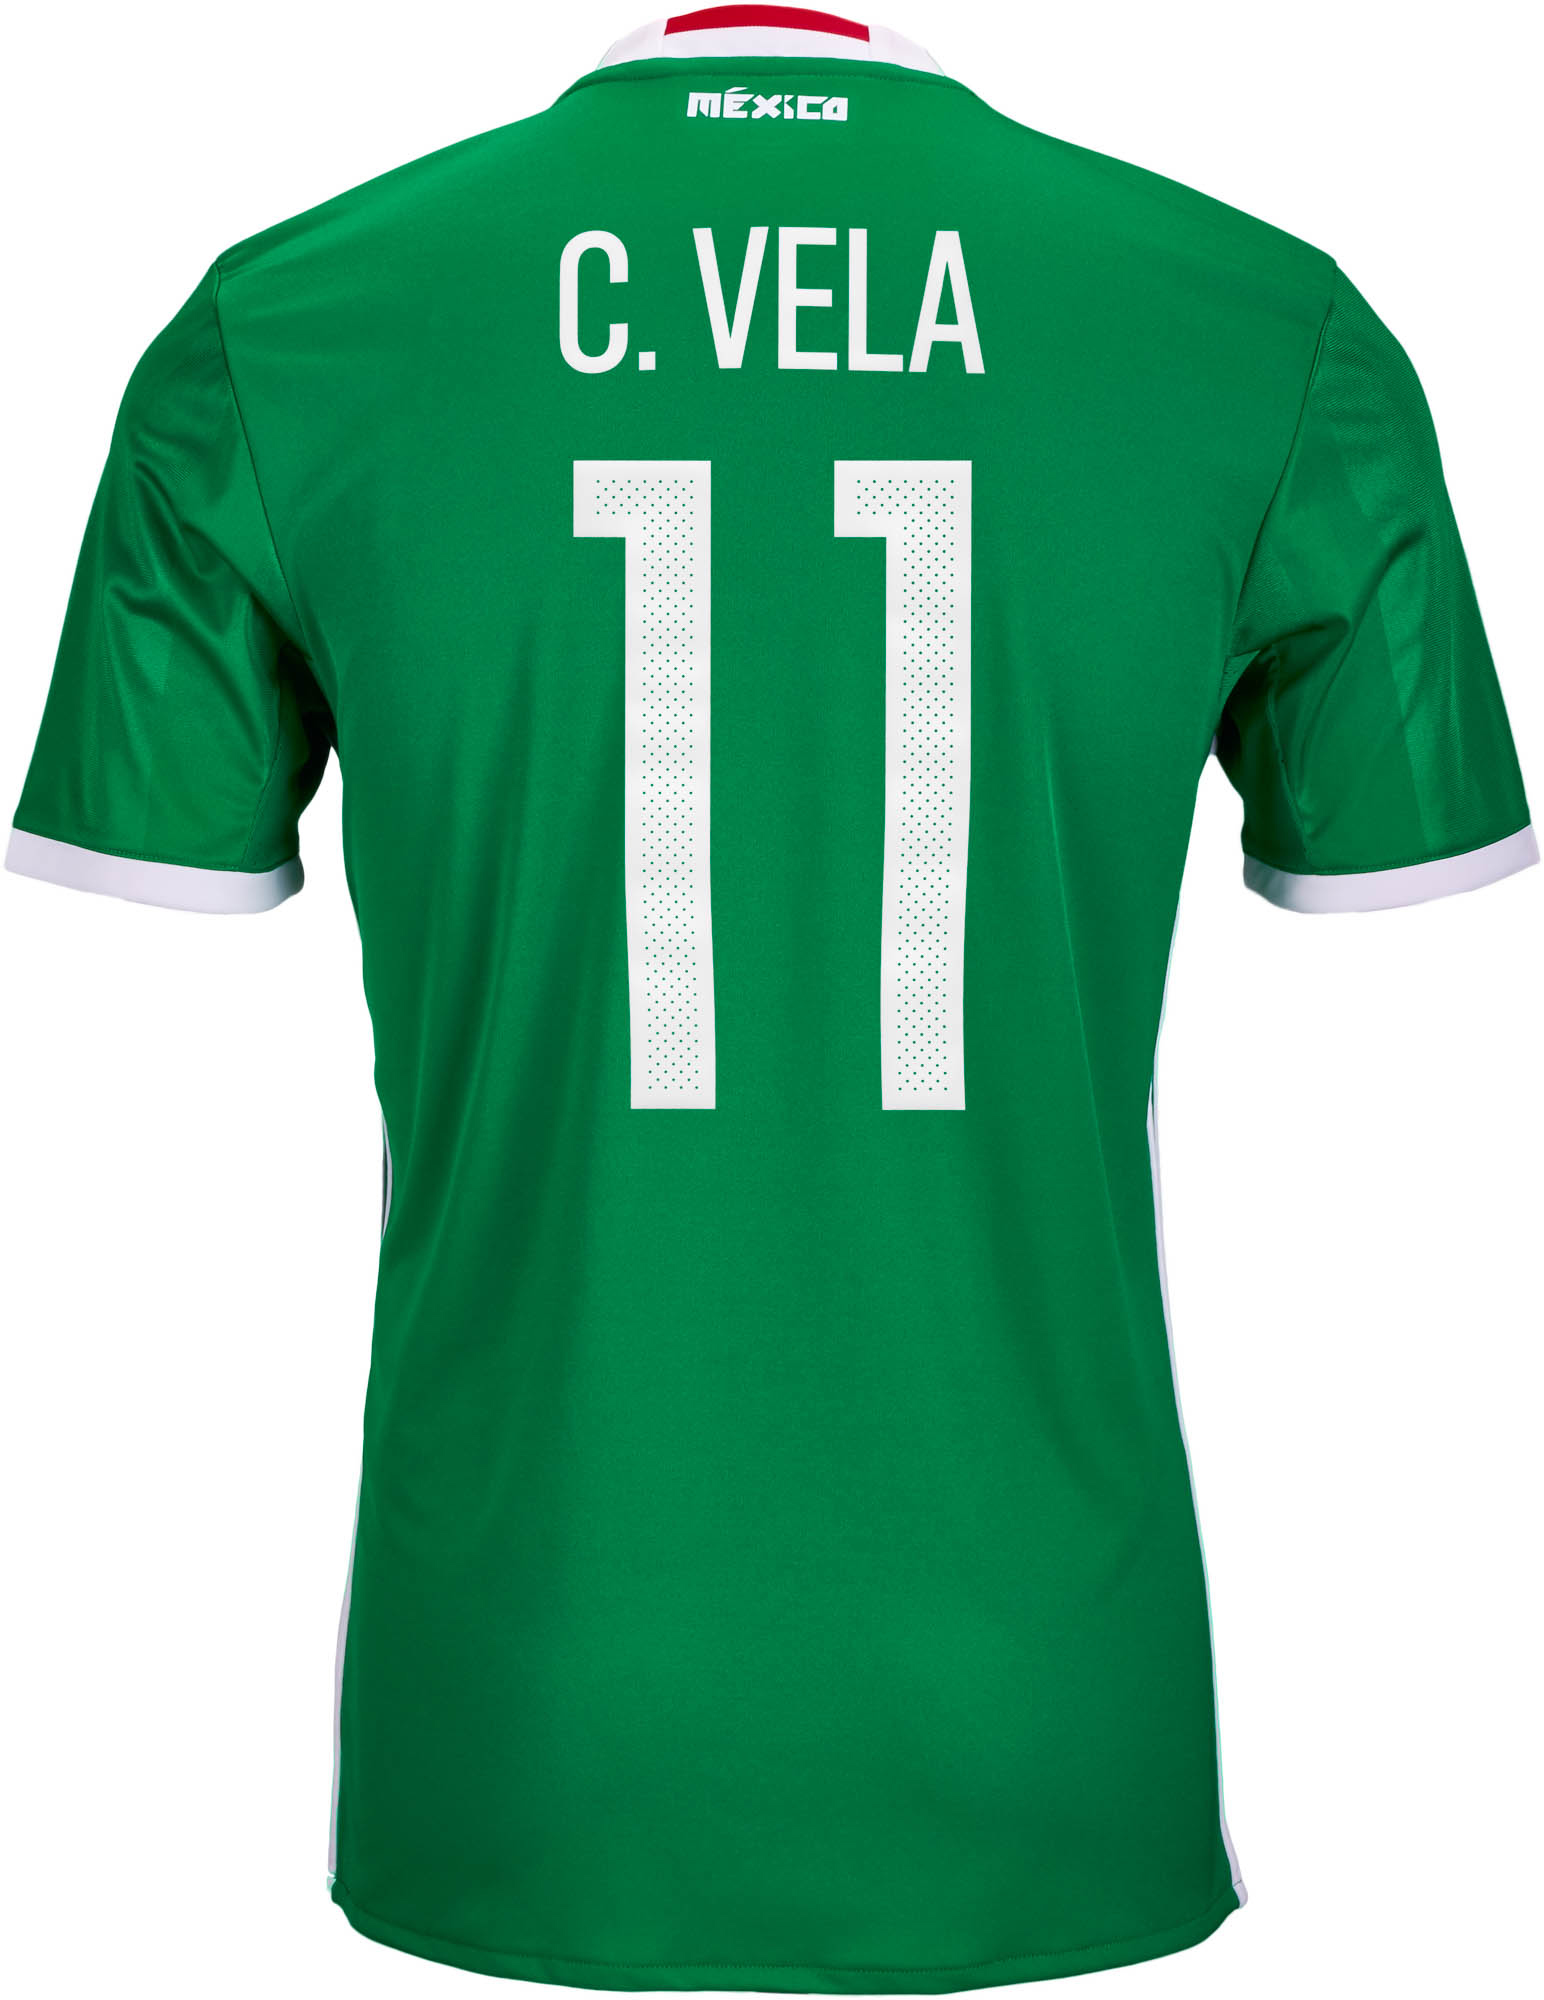 2018 mexico jersey away